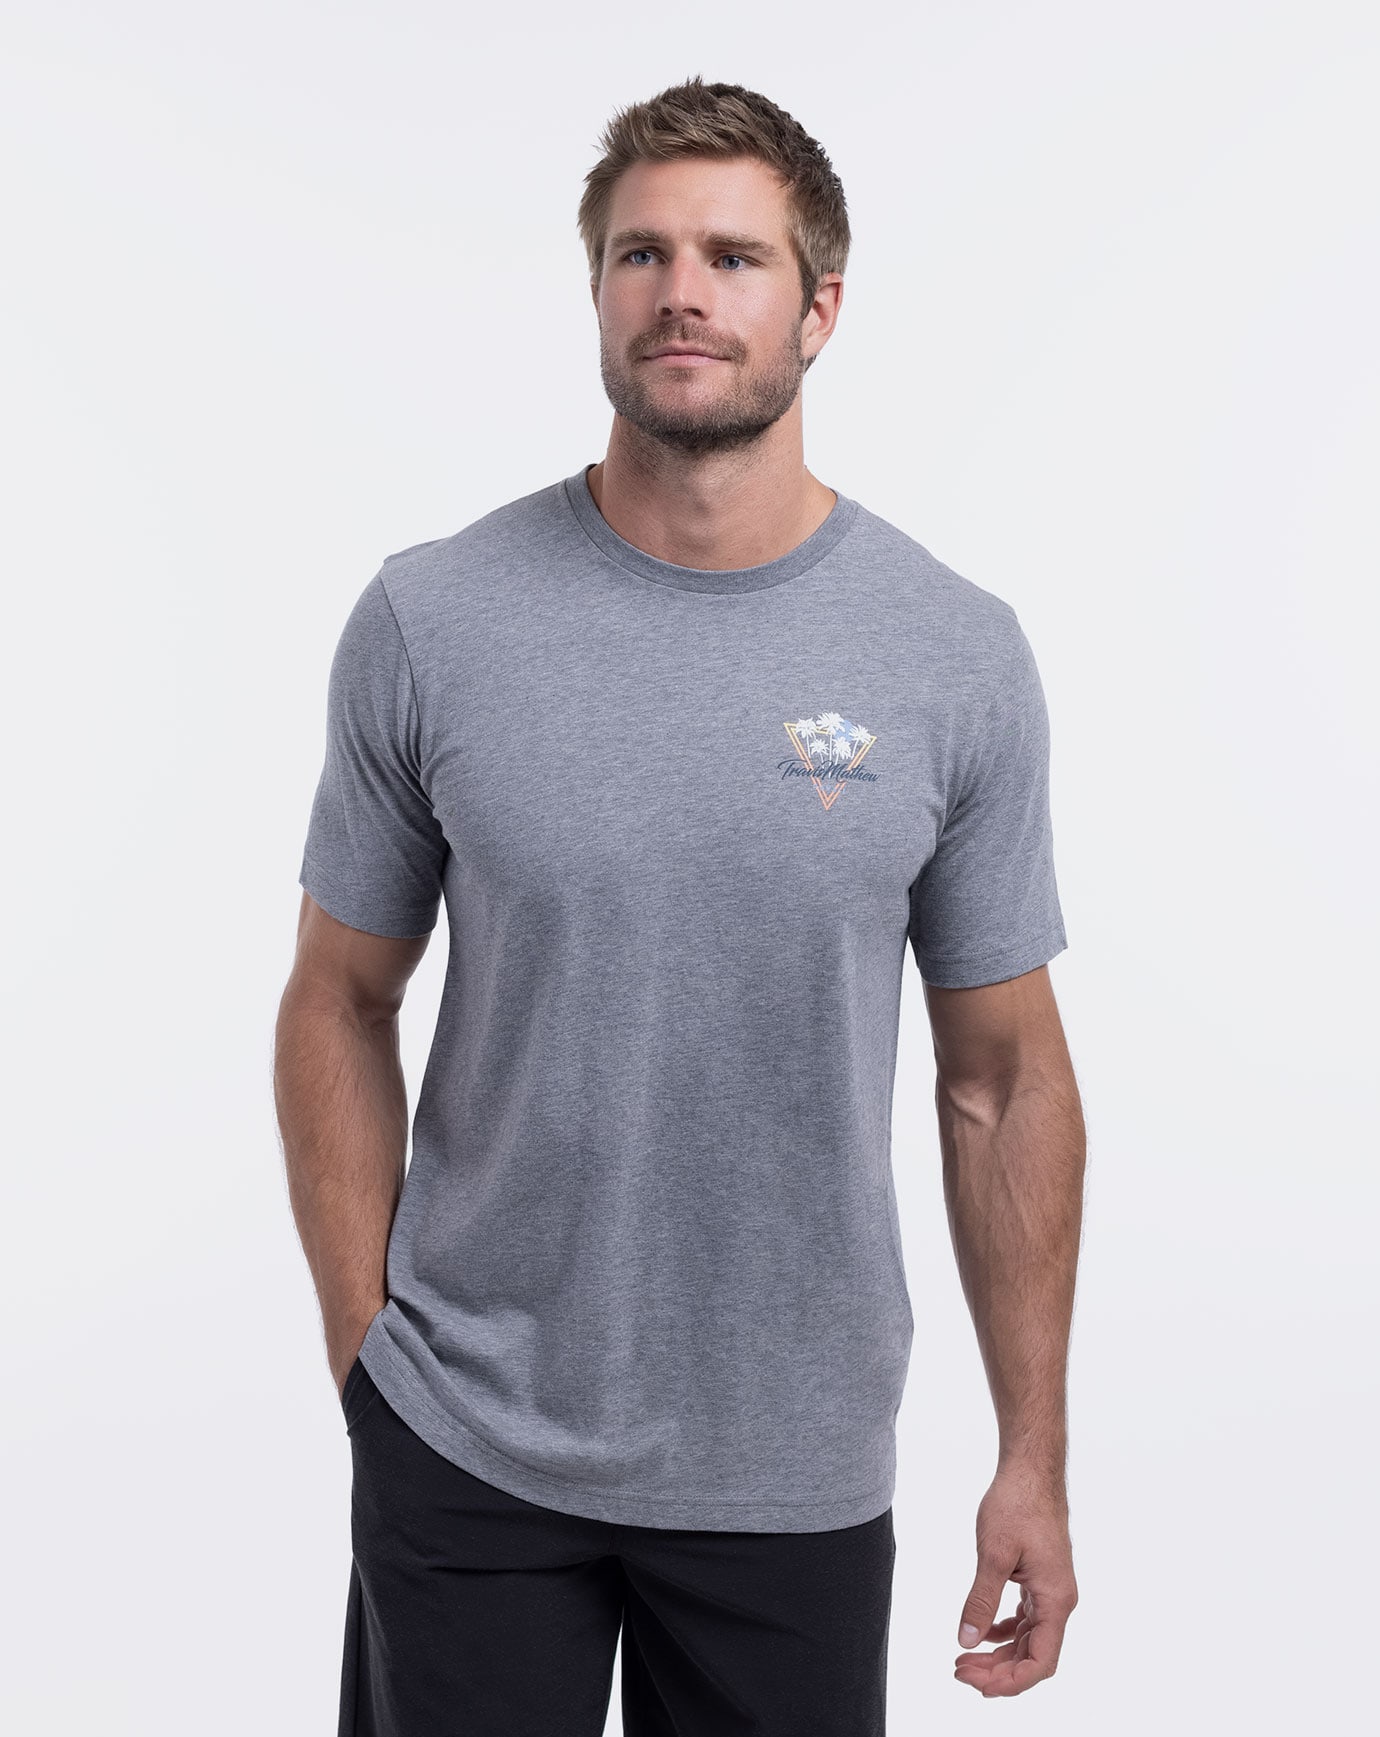 Related Product - VELOCITY TEE